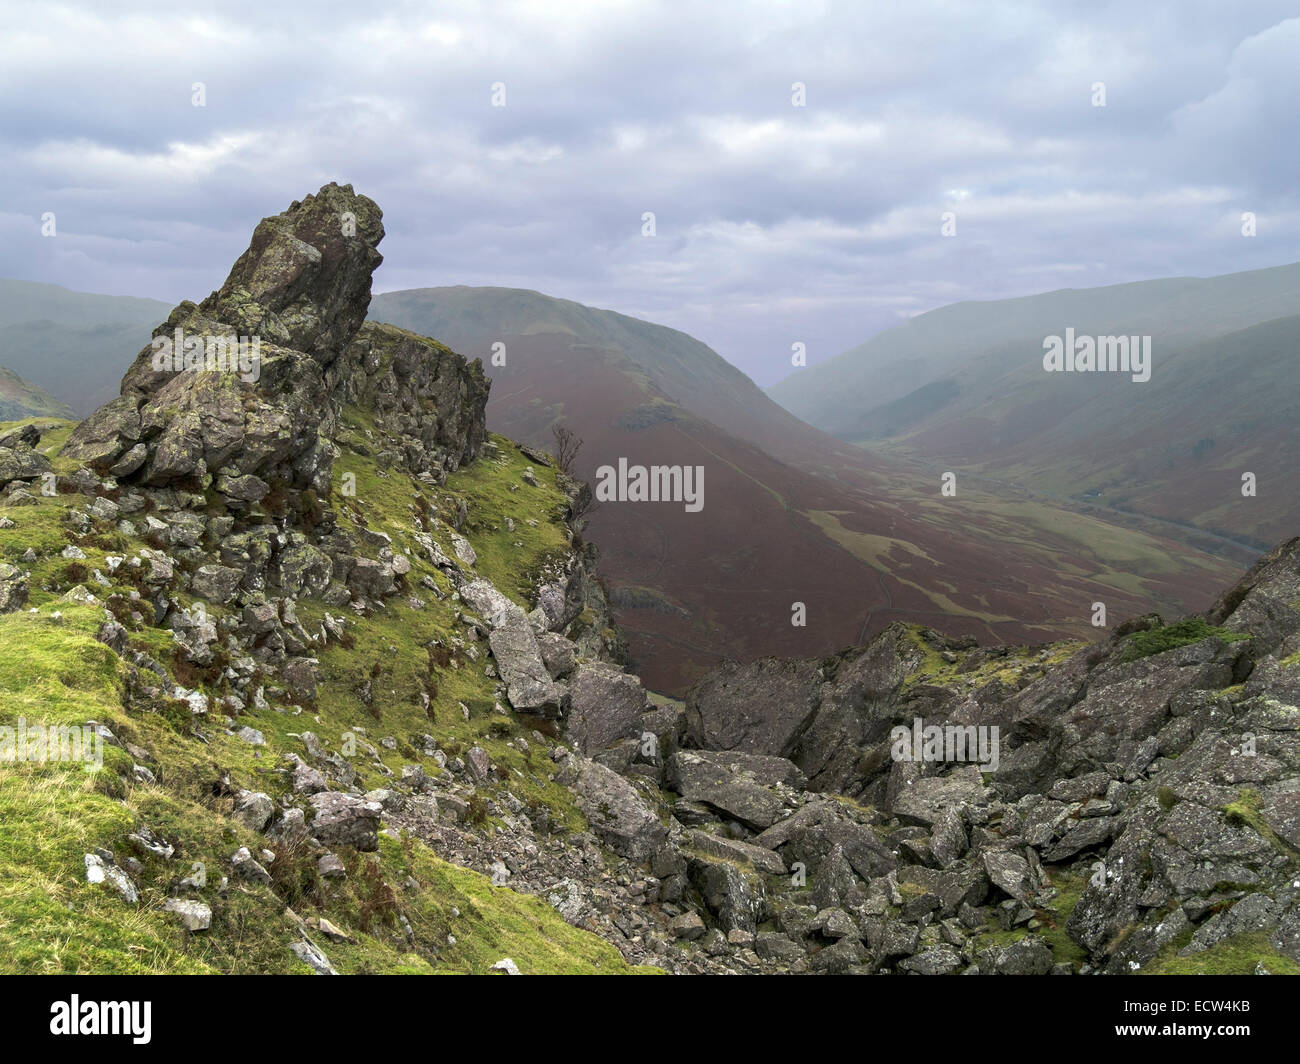 Howitzer rock formation on the summit of Helm Crag, with Thirlmere valley beyond, Grasmere, Lake District, Cumbria, England,UK Stock Photo